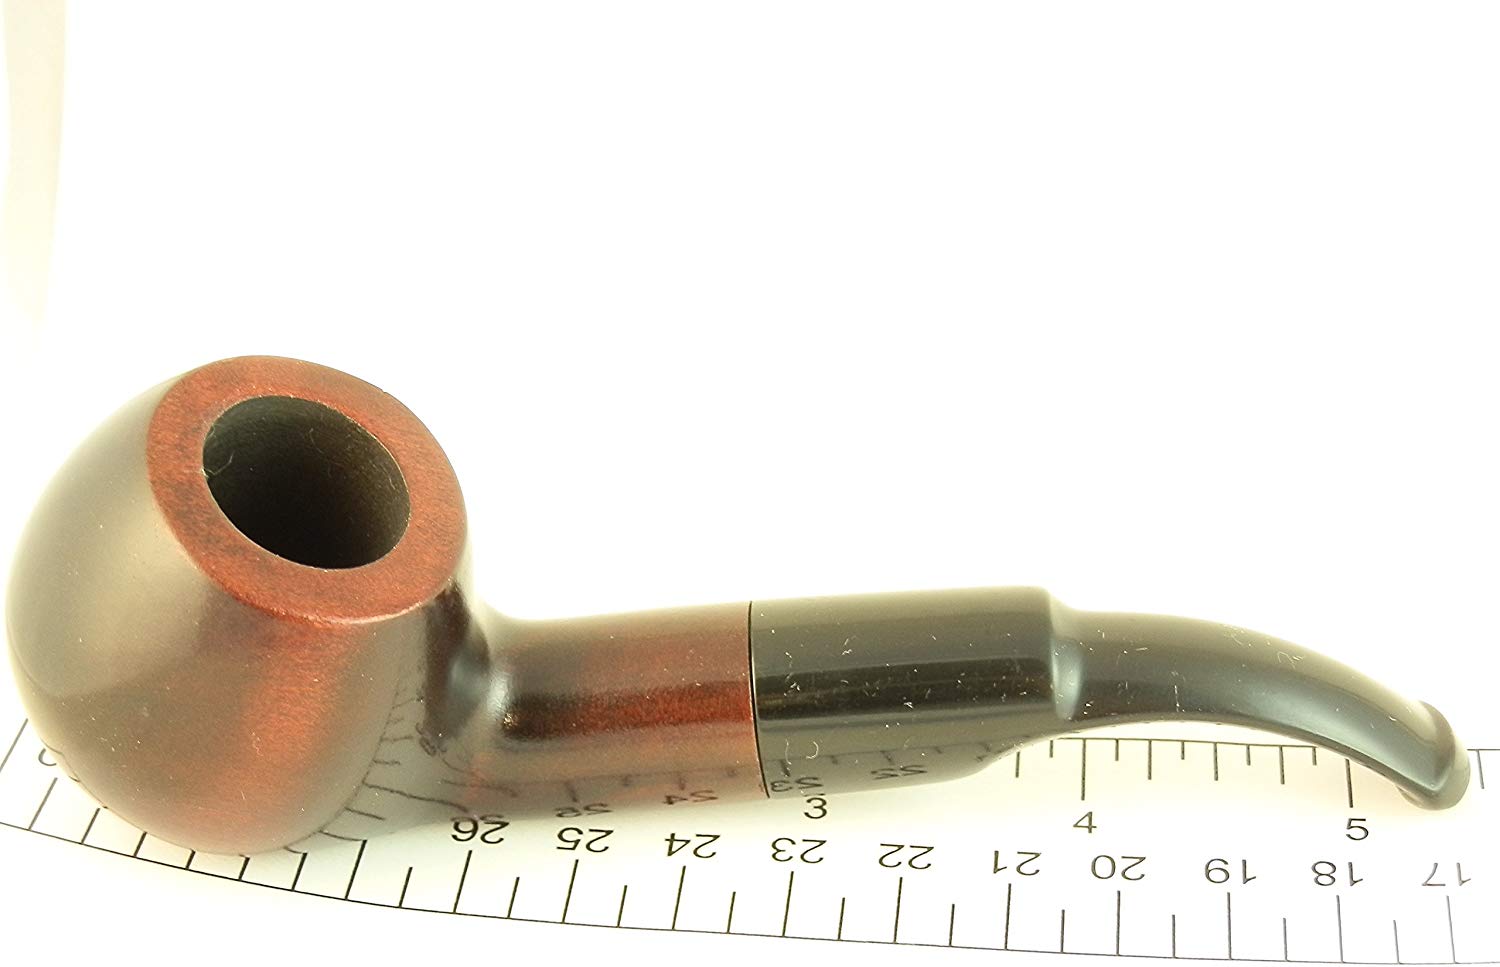 No. 23 Knolle Pear Wood Tobacco Pipe